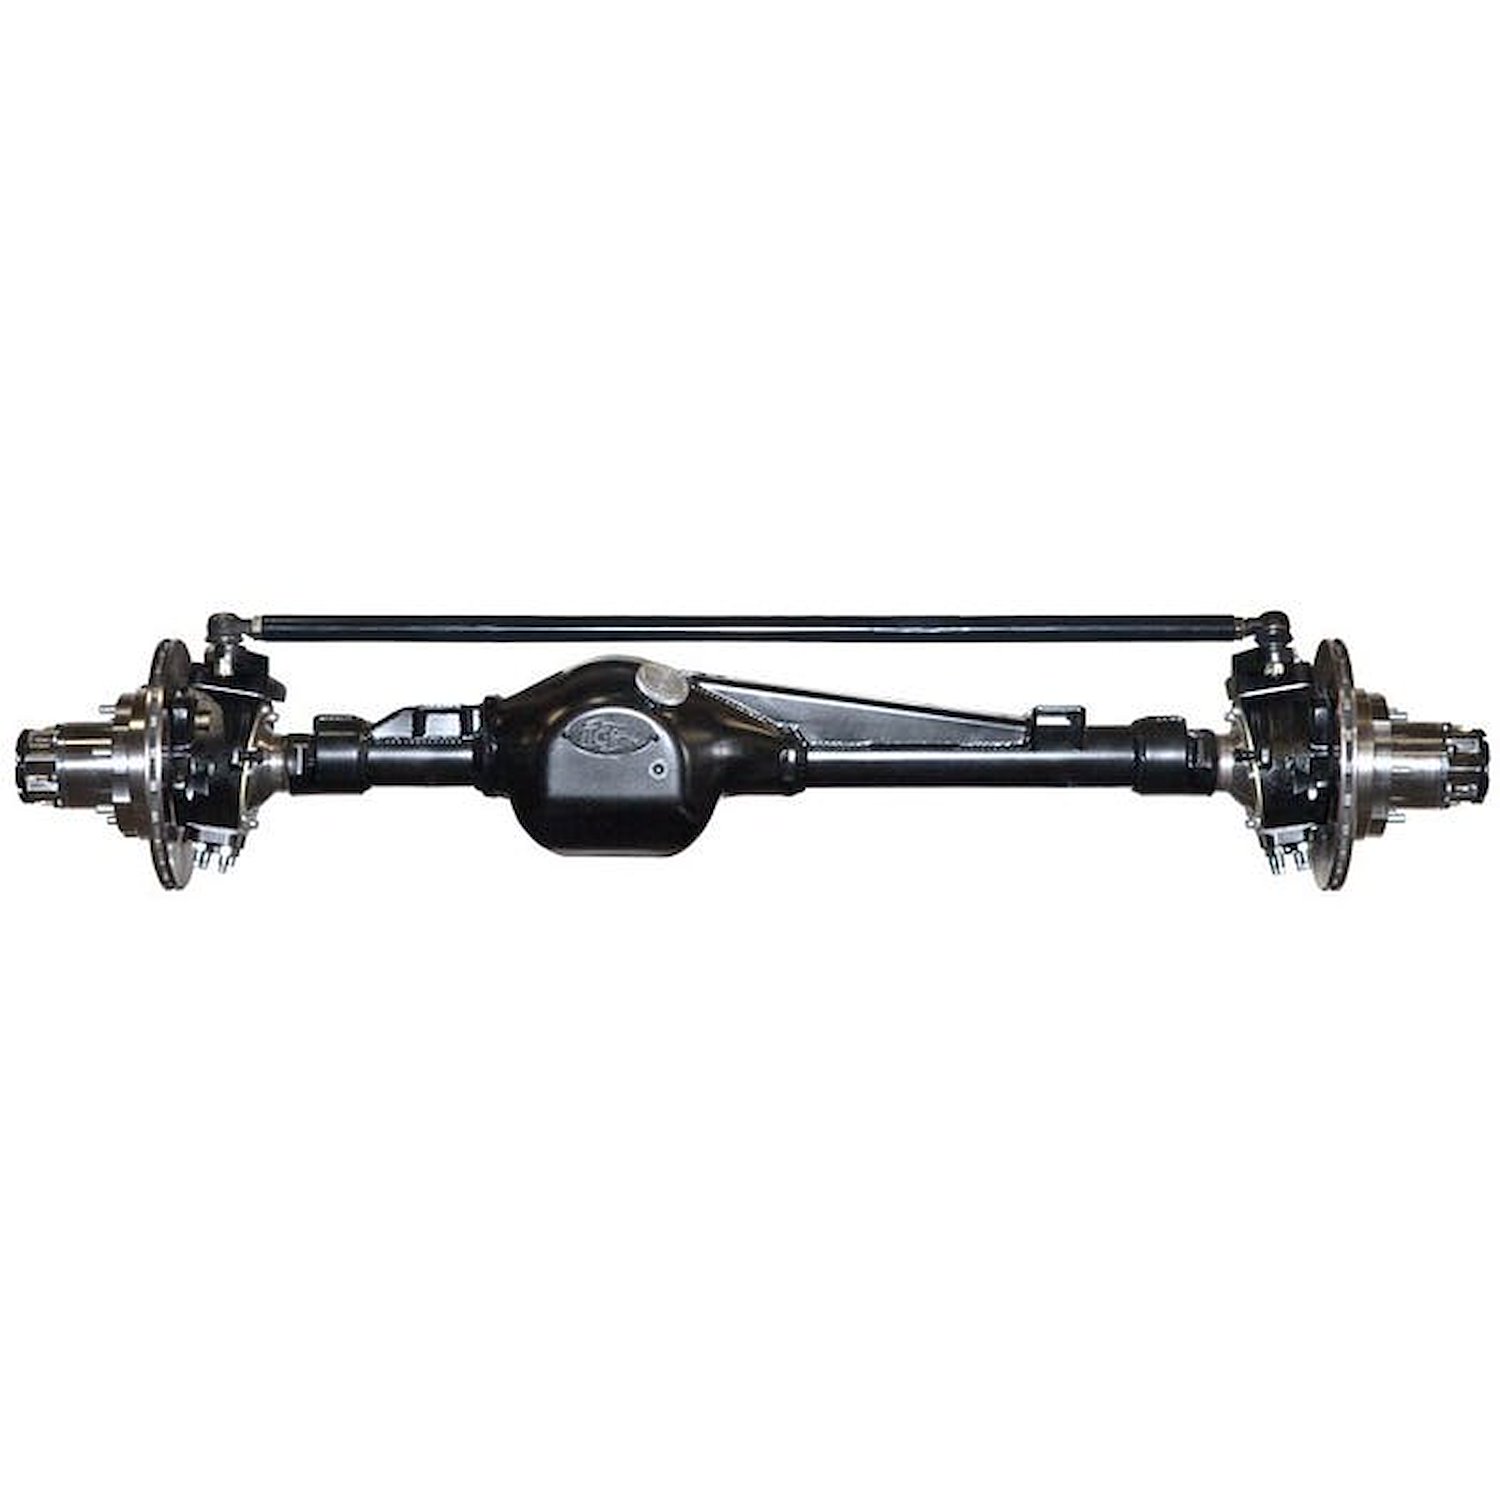 301656-1-KIT Rock Assault Fully-Built Front Axles, +5 Width, LHD, High-Pinion, 4.88, Grizzly, Creeper Flanges, Toyota